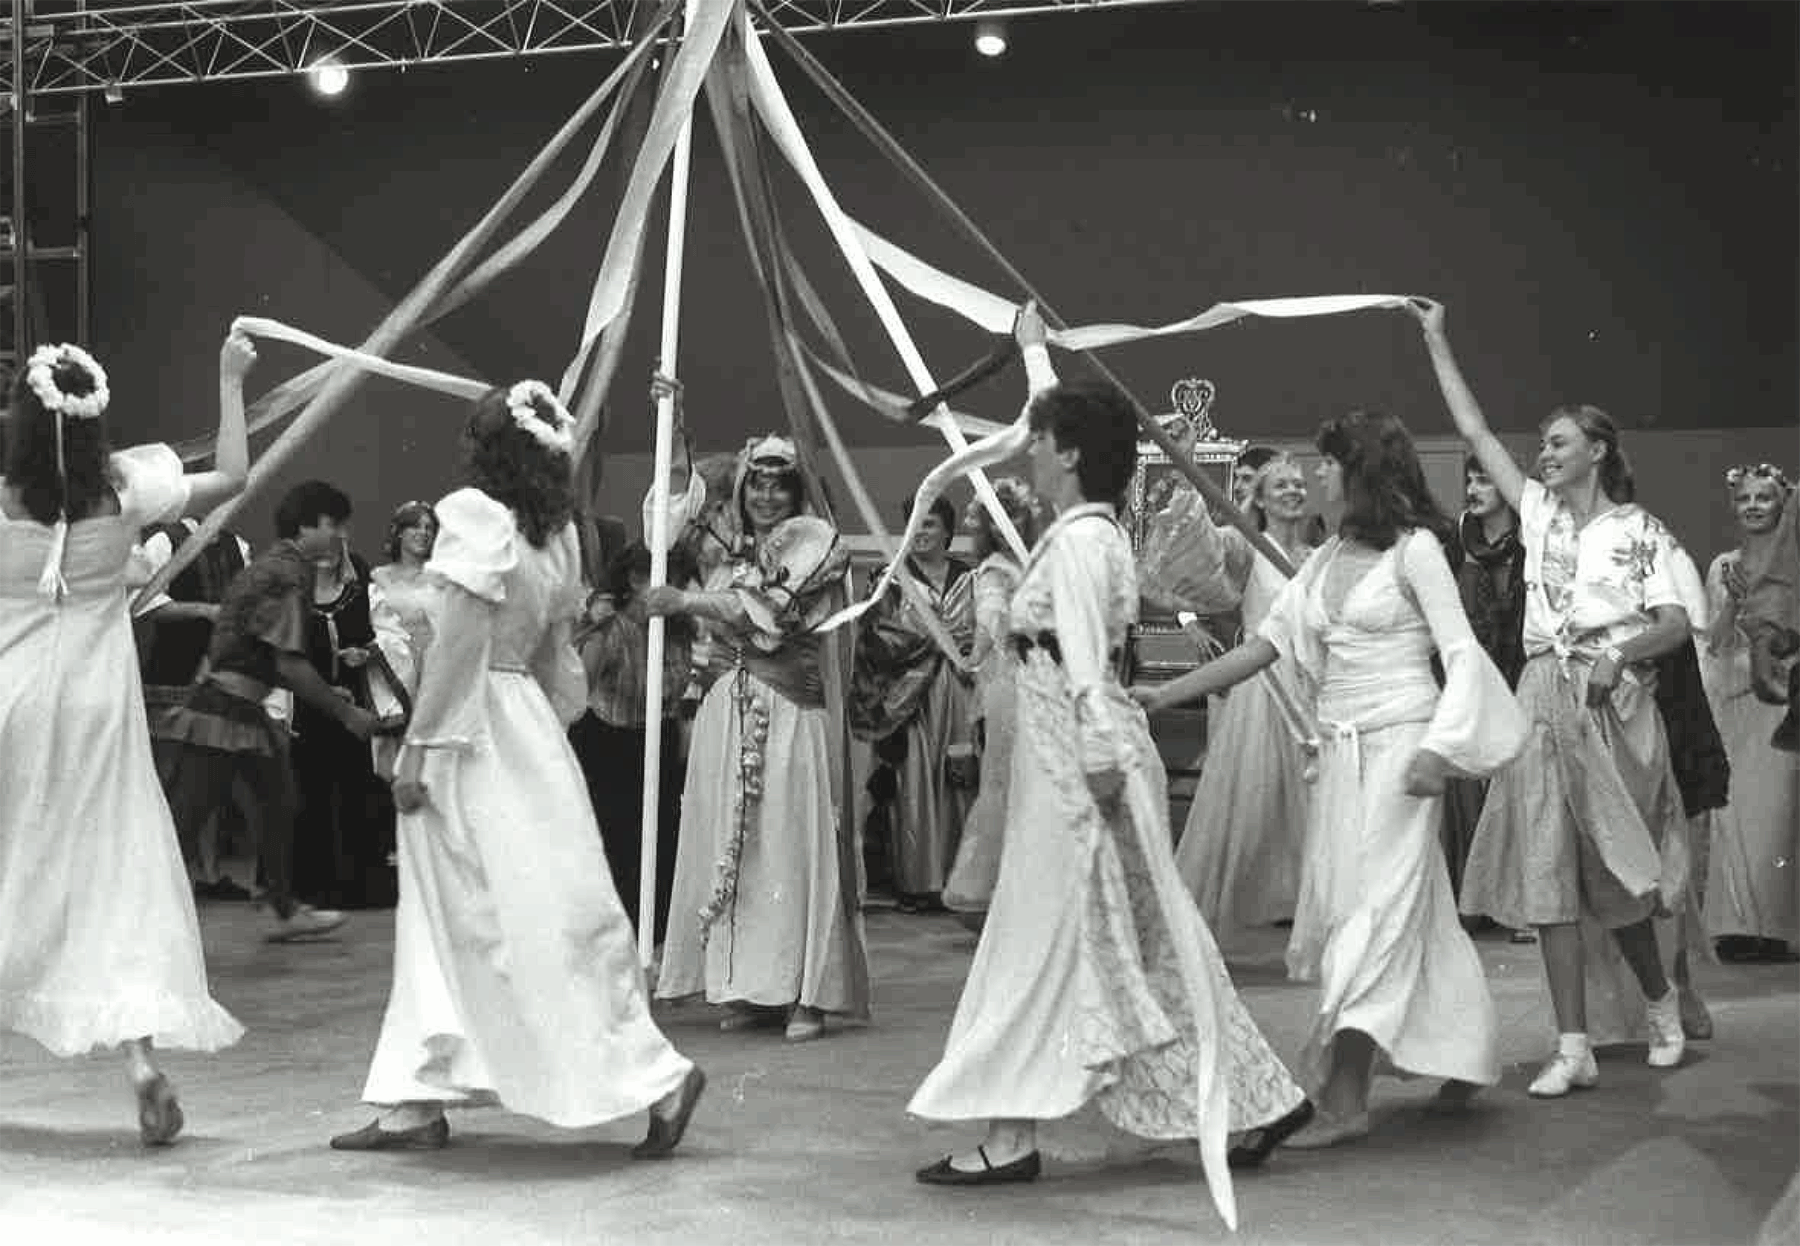 Ladies of the Court in the Camelot production, 1986